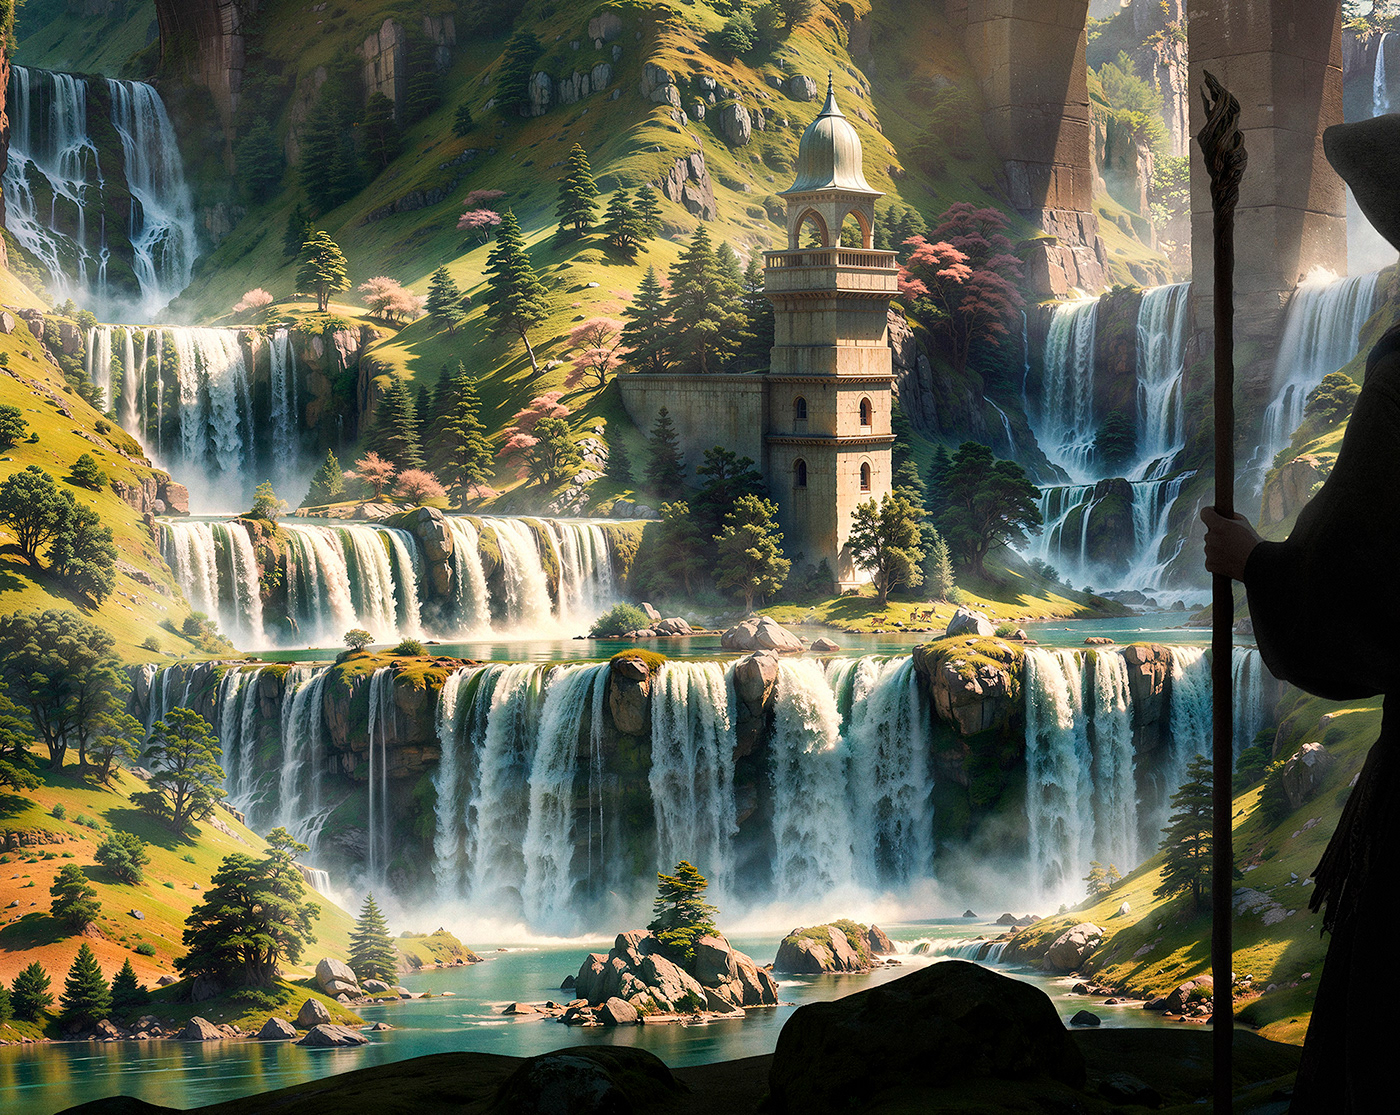 Lord of the rings the Hobbit gandalf wizard fantasy ruins abandoned Waterfalls Tolkien Ancient City